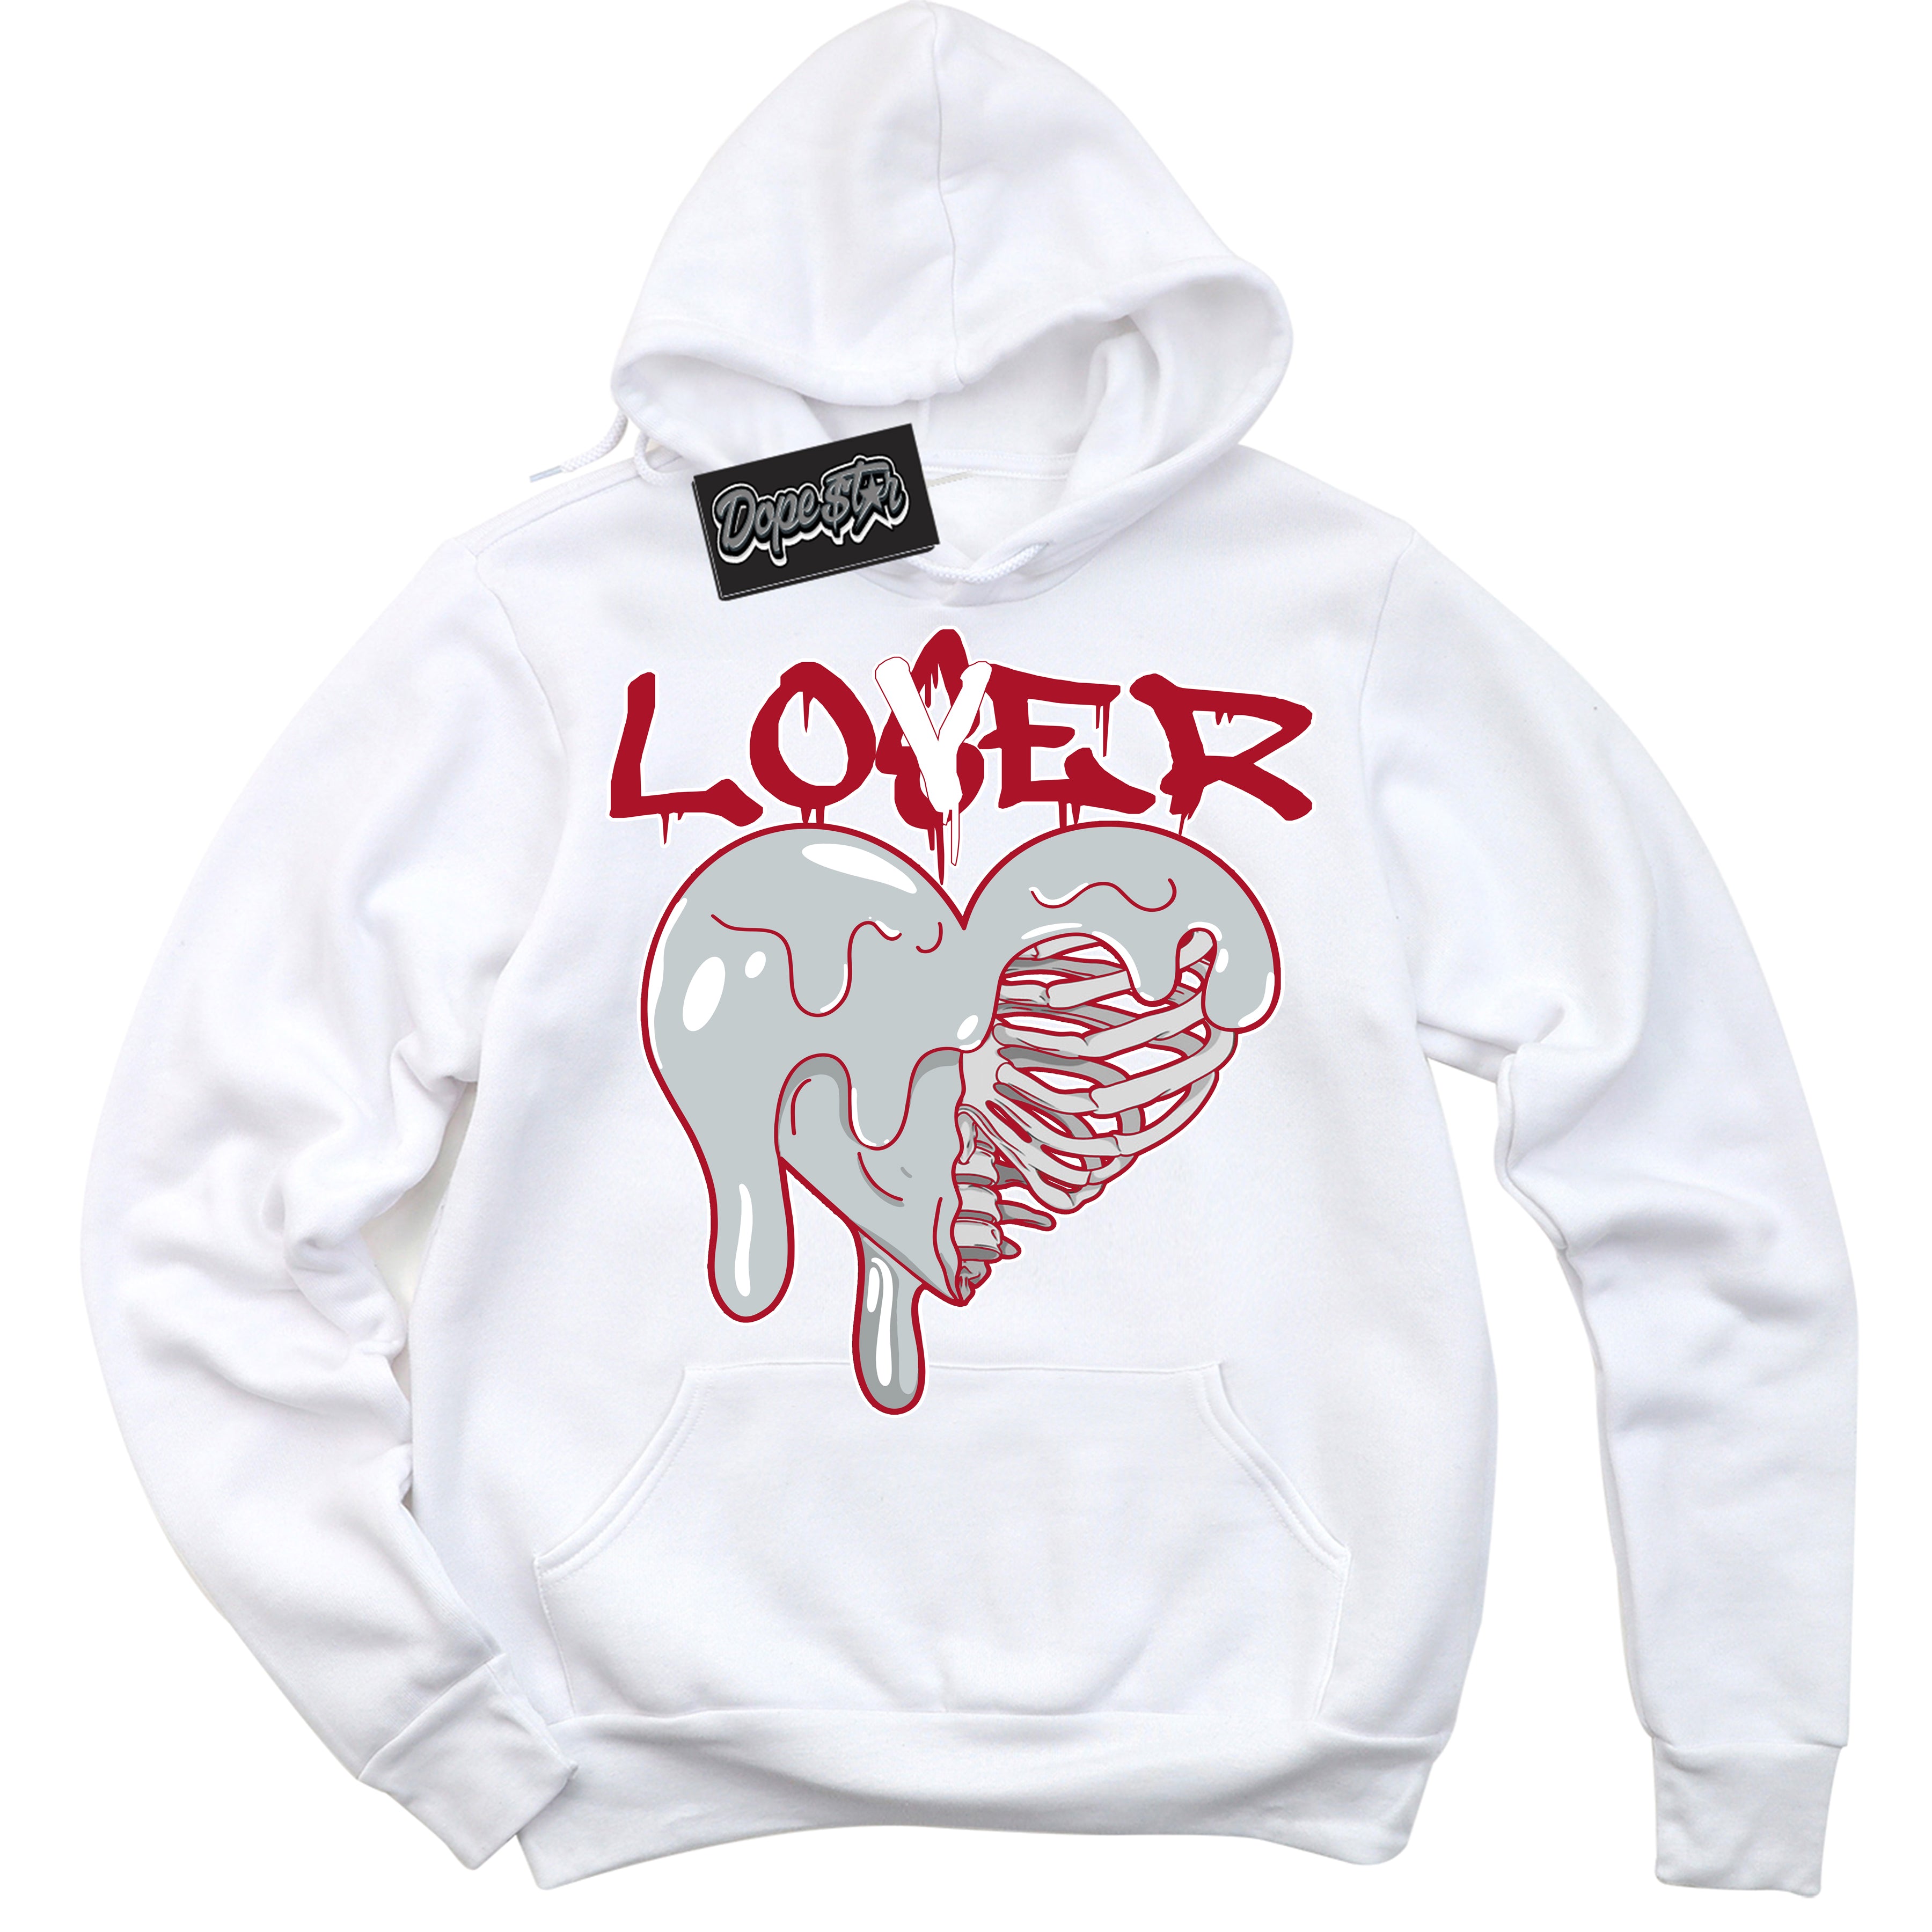 Cool Black Hoodie with “ Lover Loser ”  design that Perfectly Matches  Reverse Ultraman Sneakers.